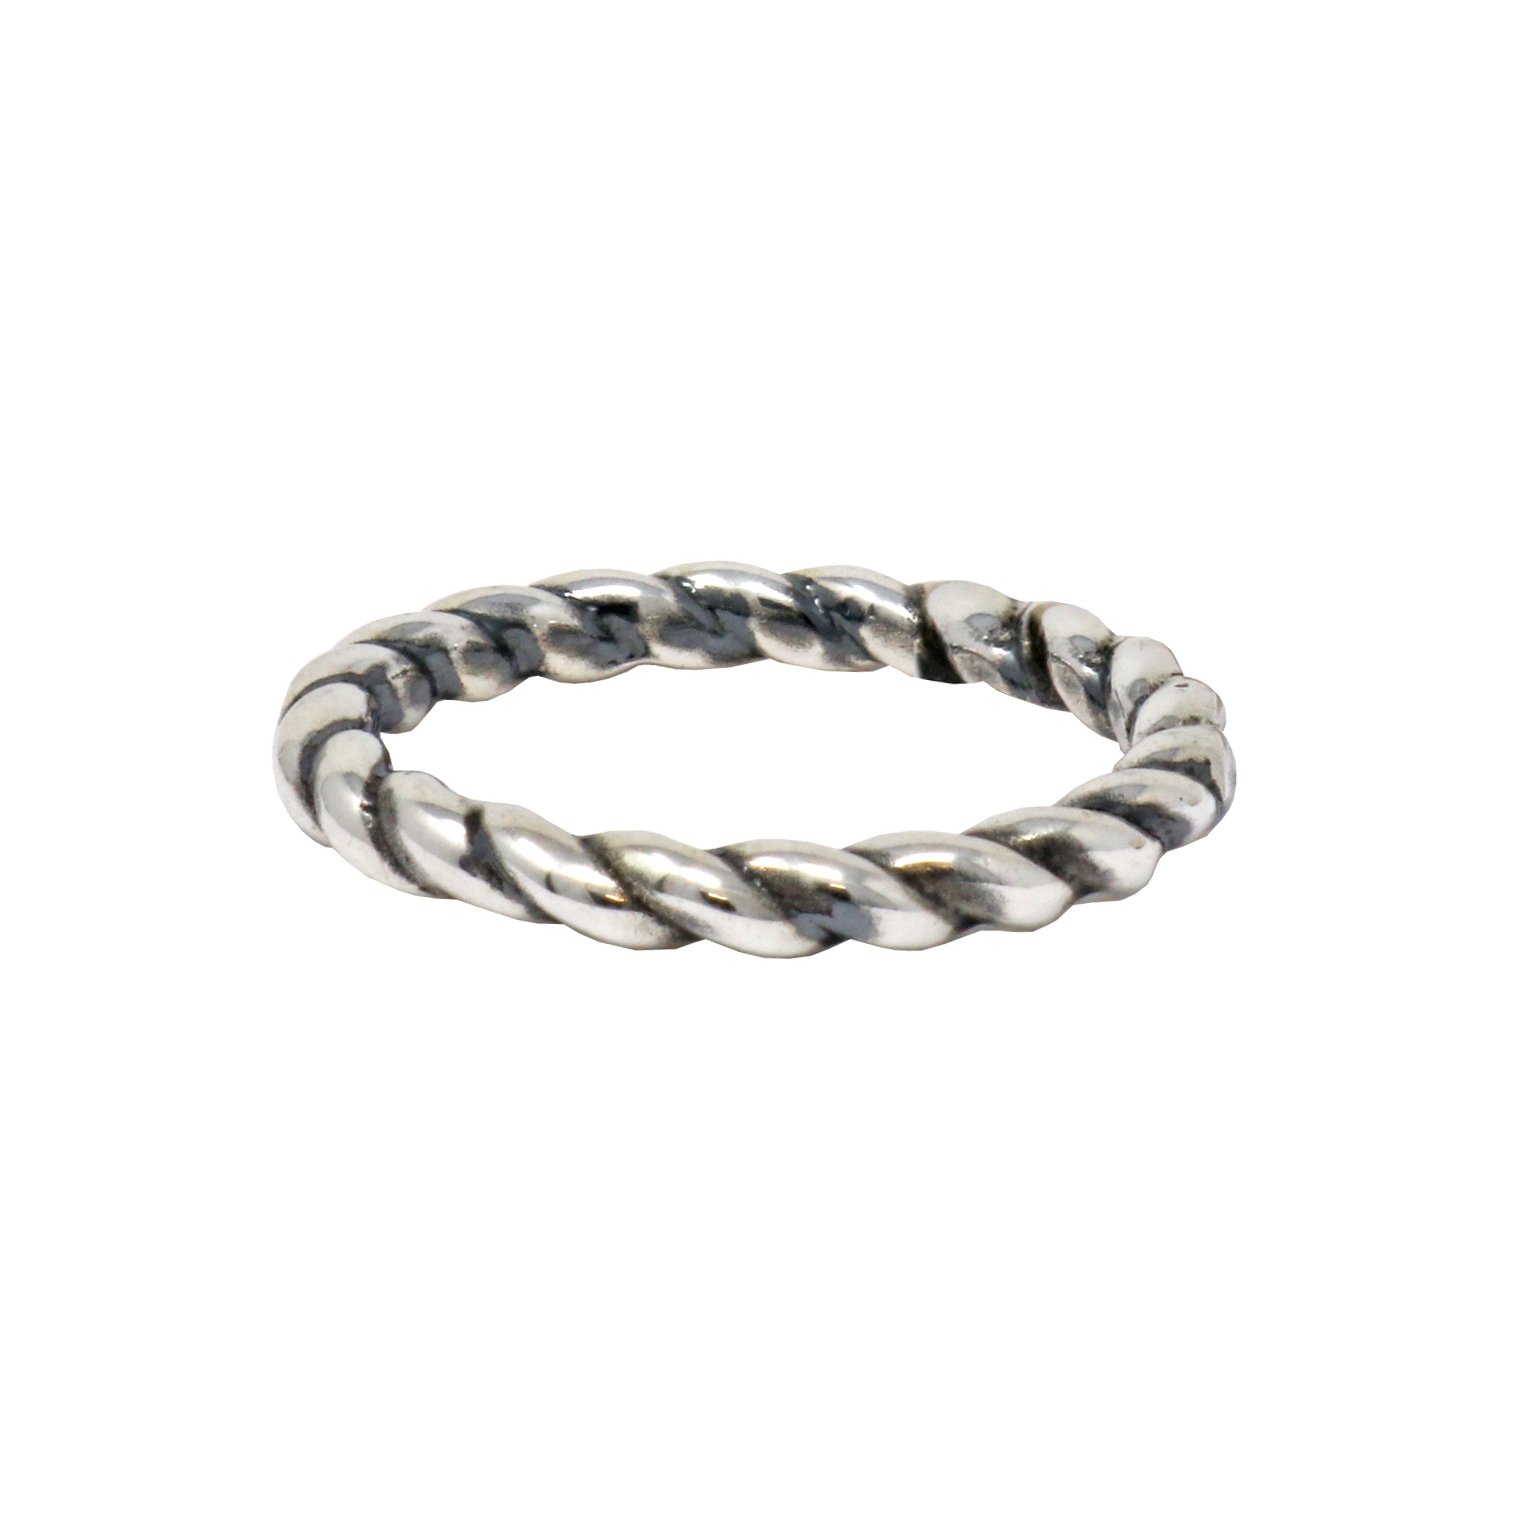 Silver Ring Size 7 - Rope